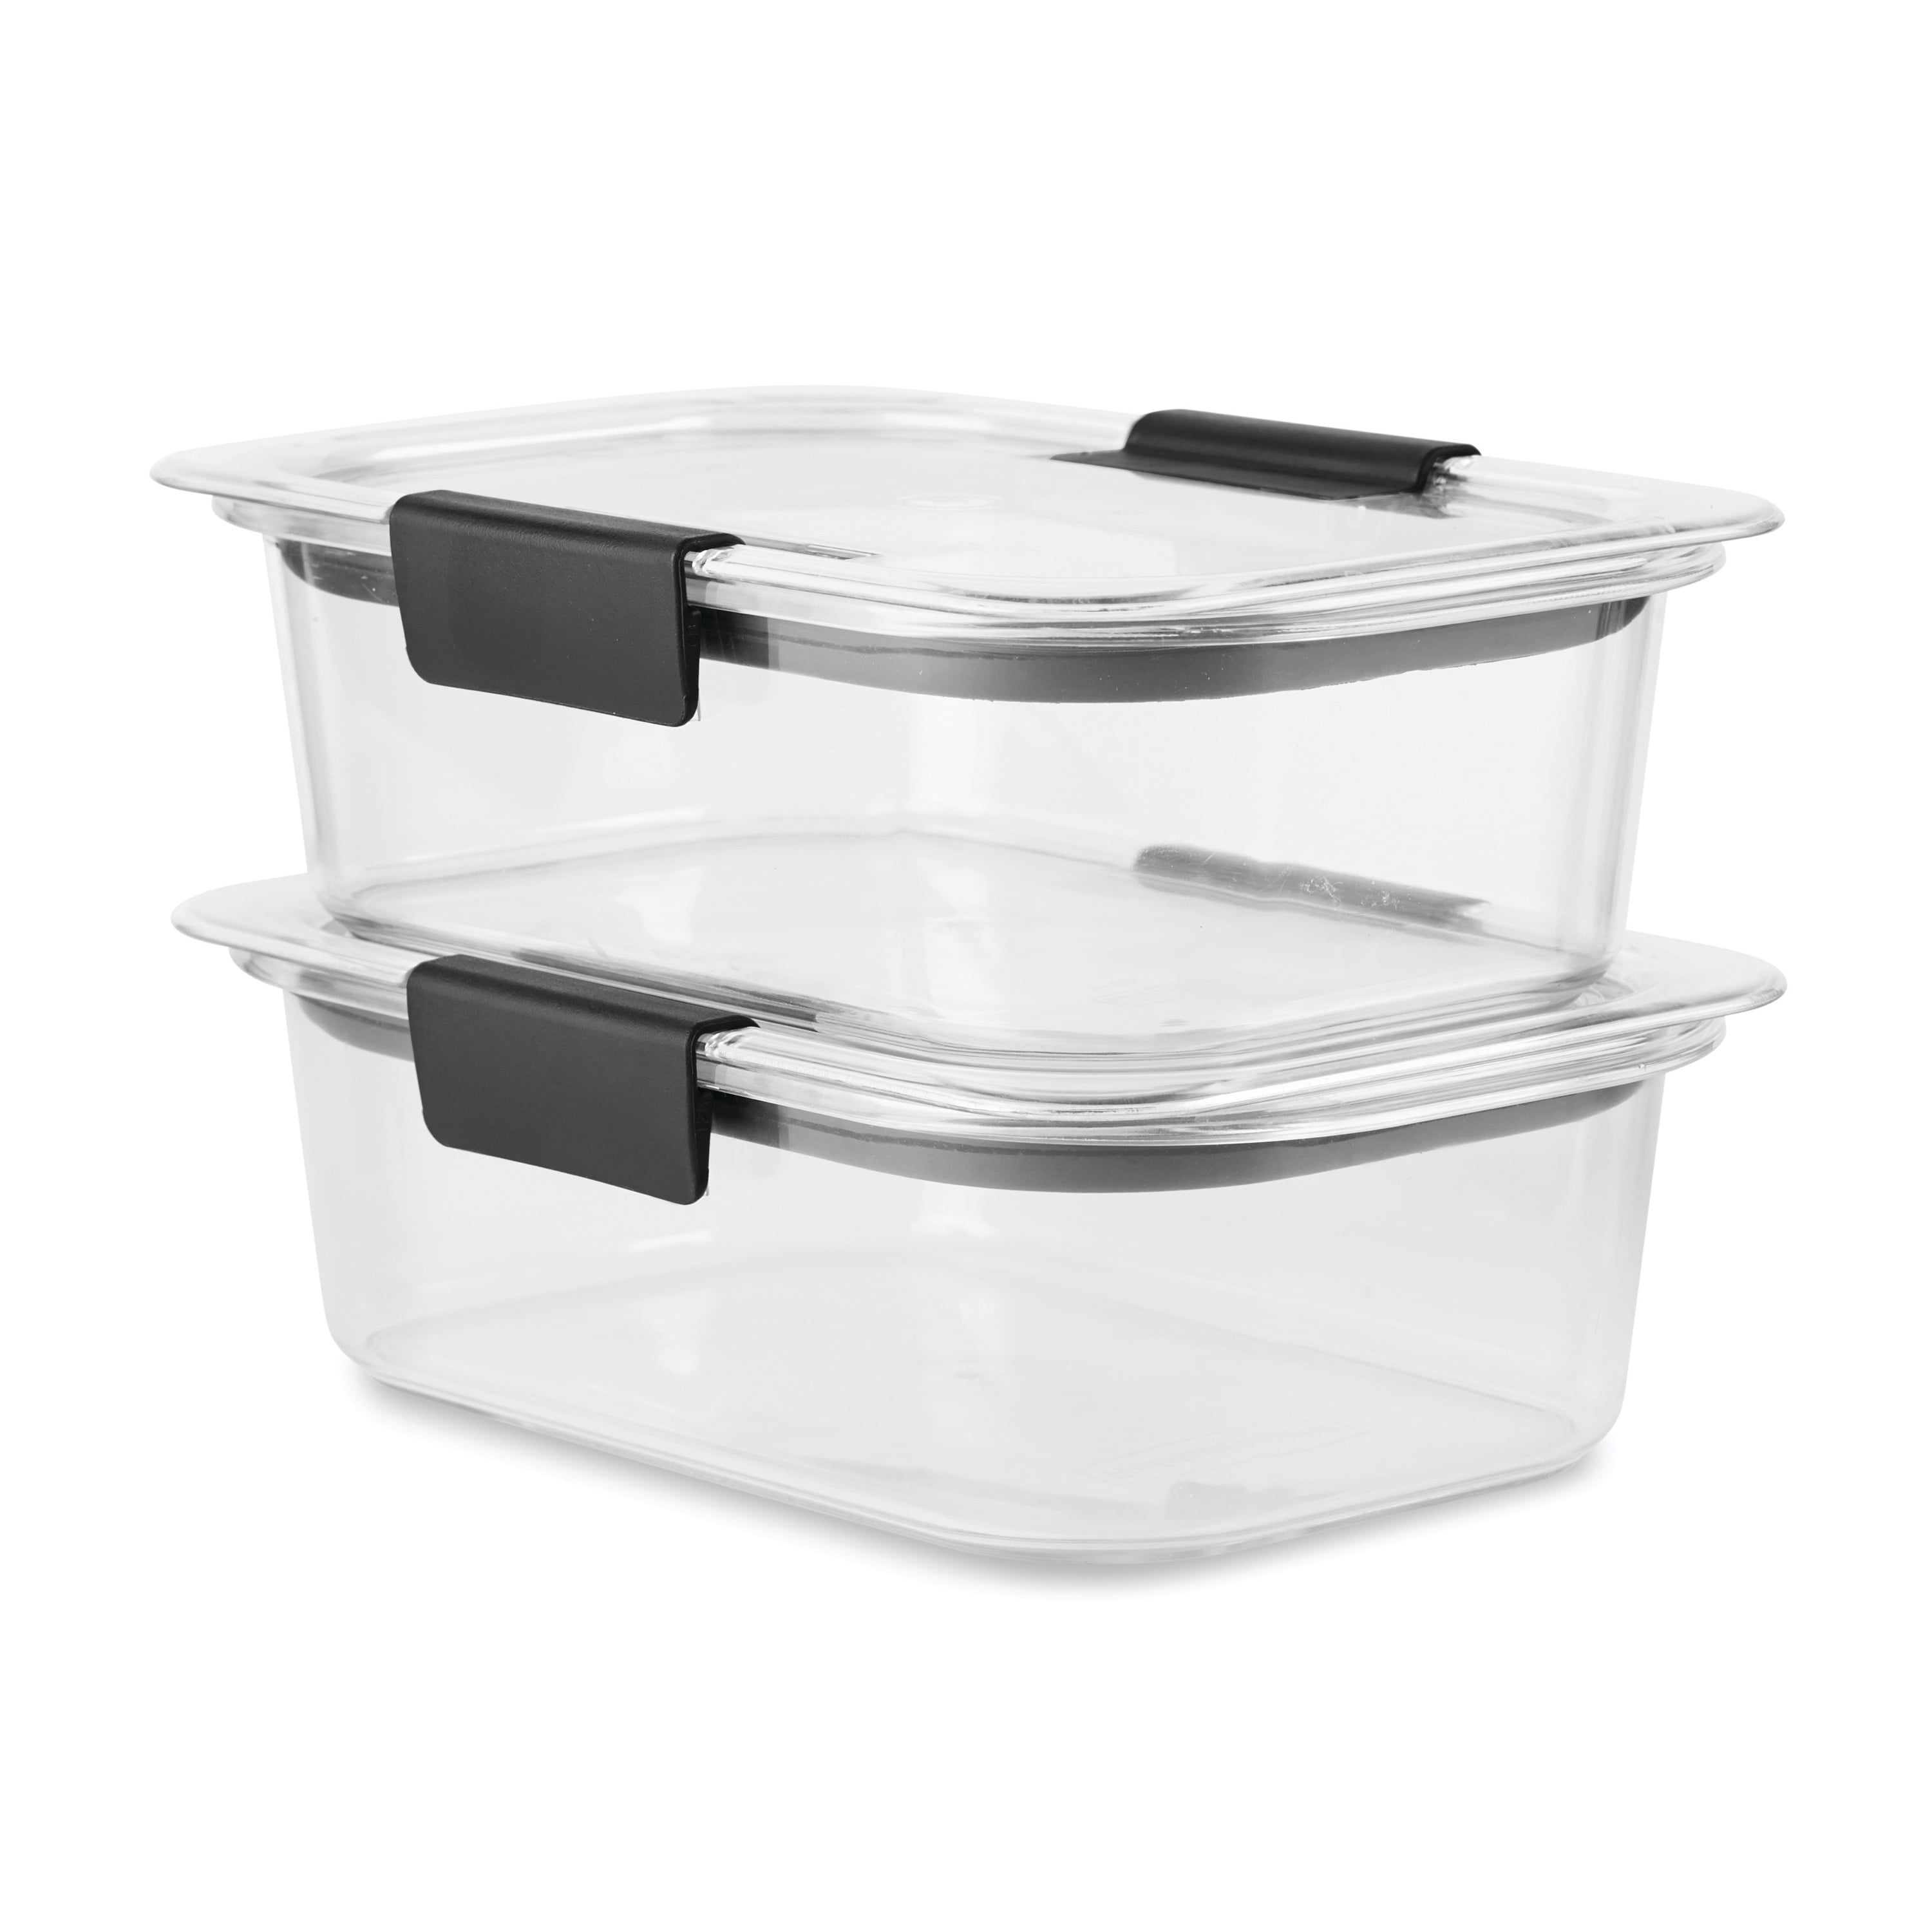 Rubbermaid 2-Pack 3.2 Cup Brilliance Glass Food Storage - 2183406